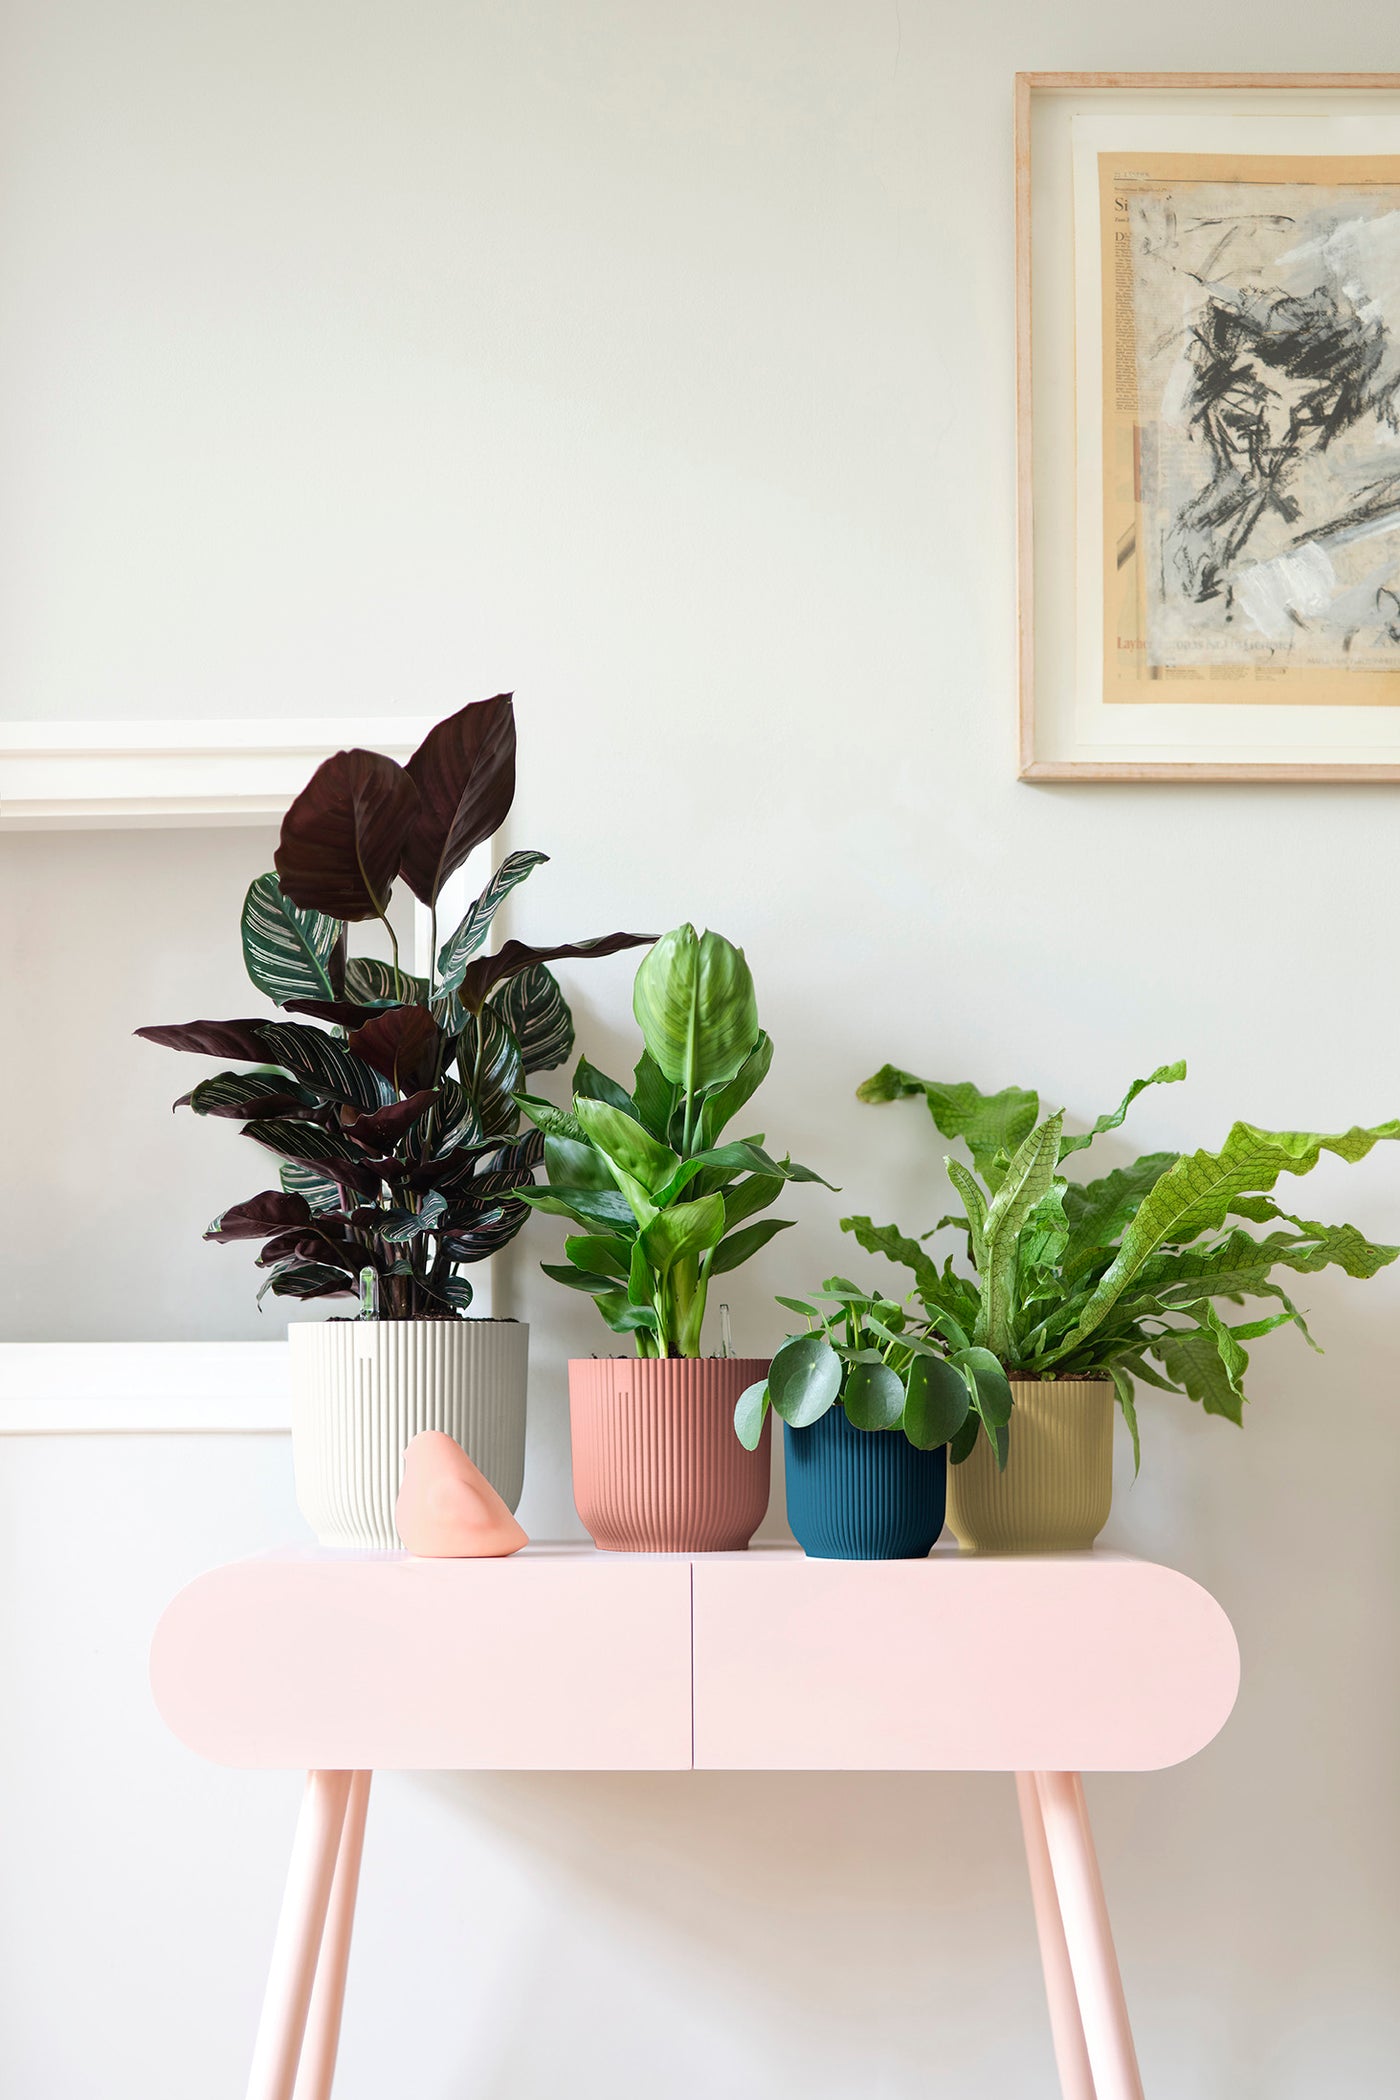 Aglaonema Pink Star and Vibes Pot